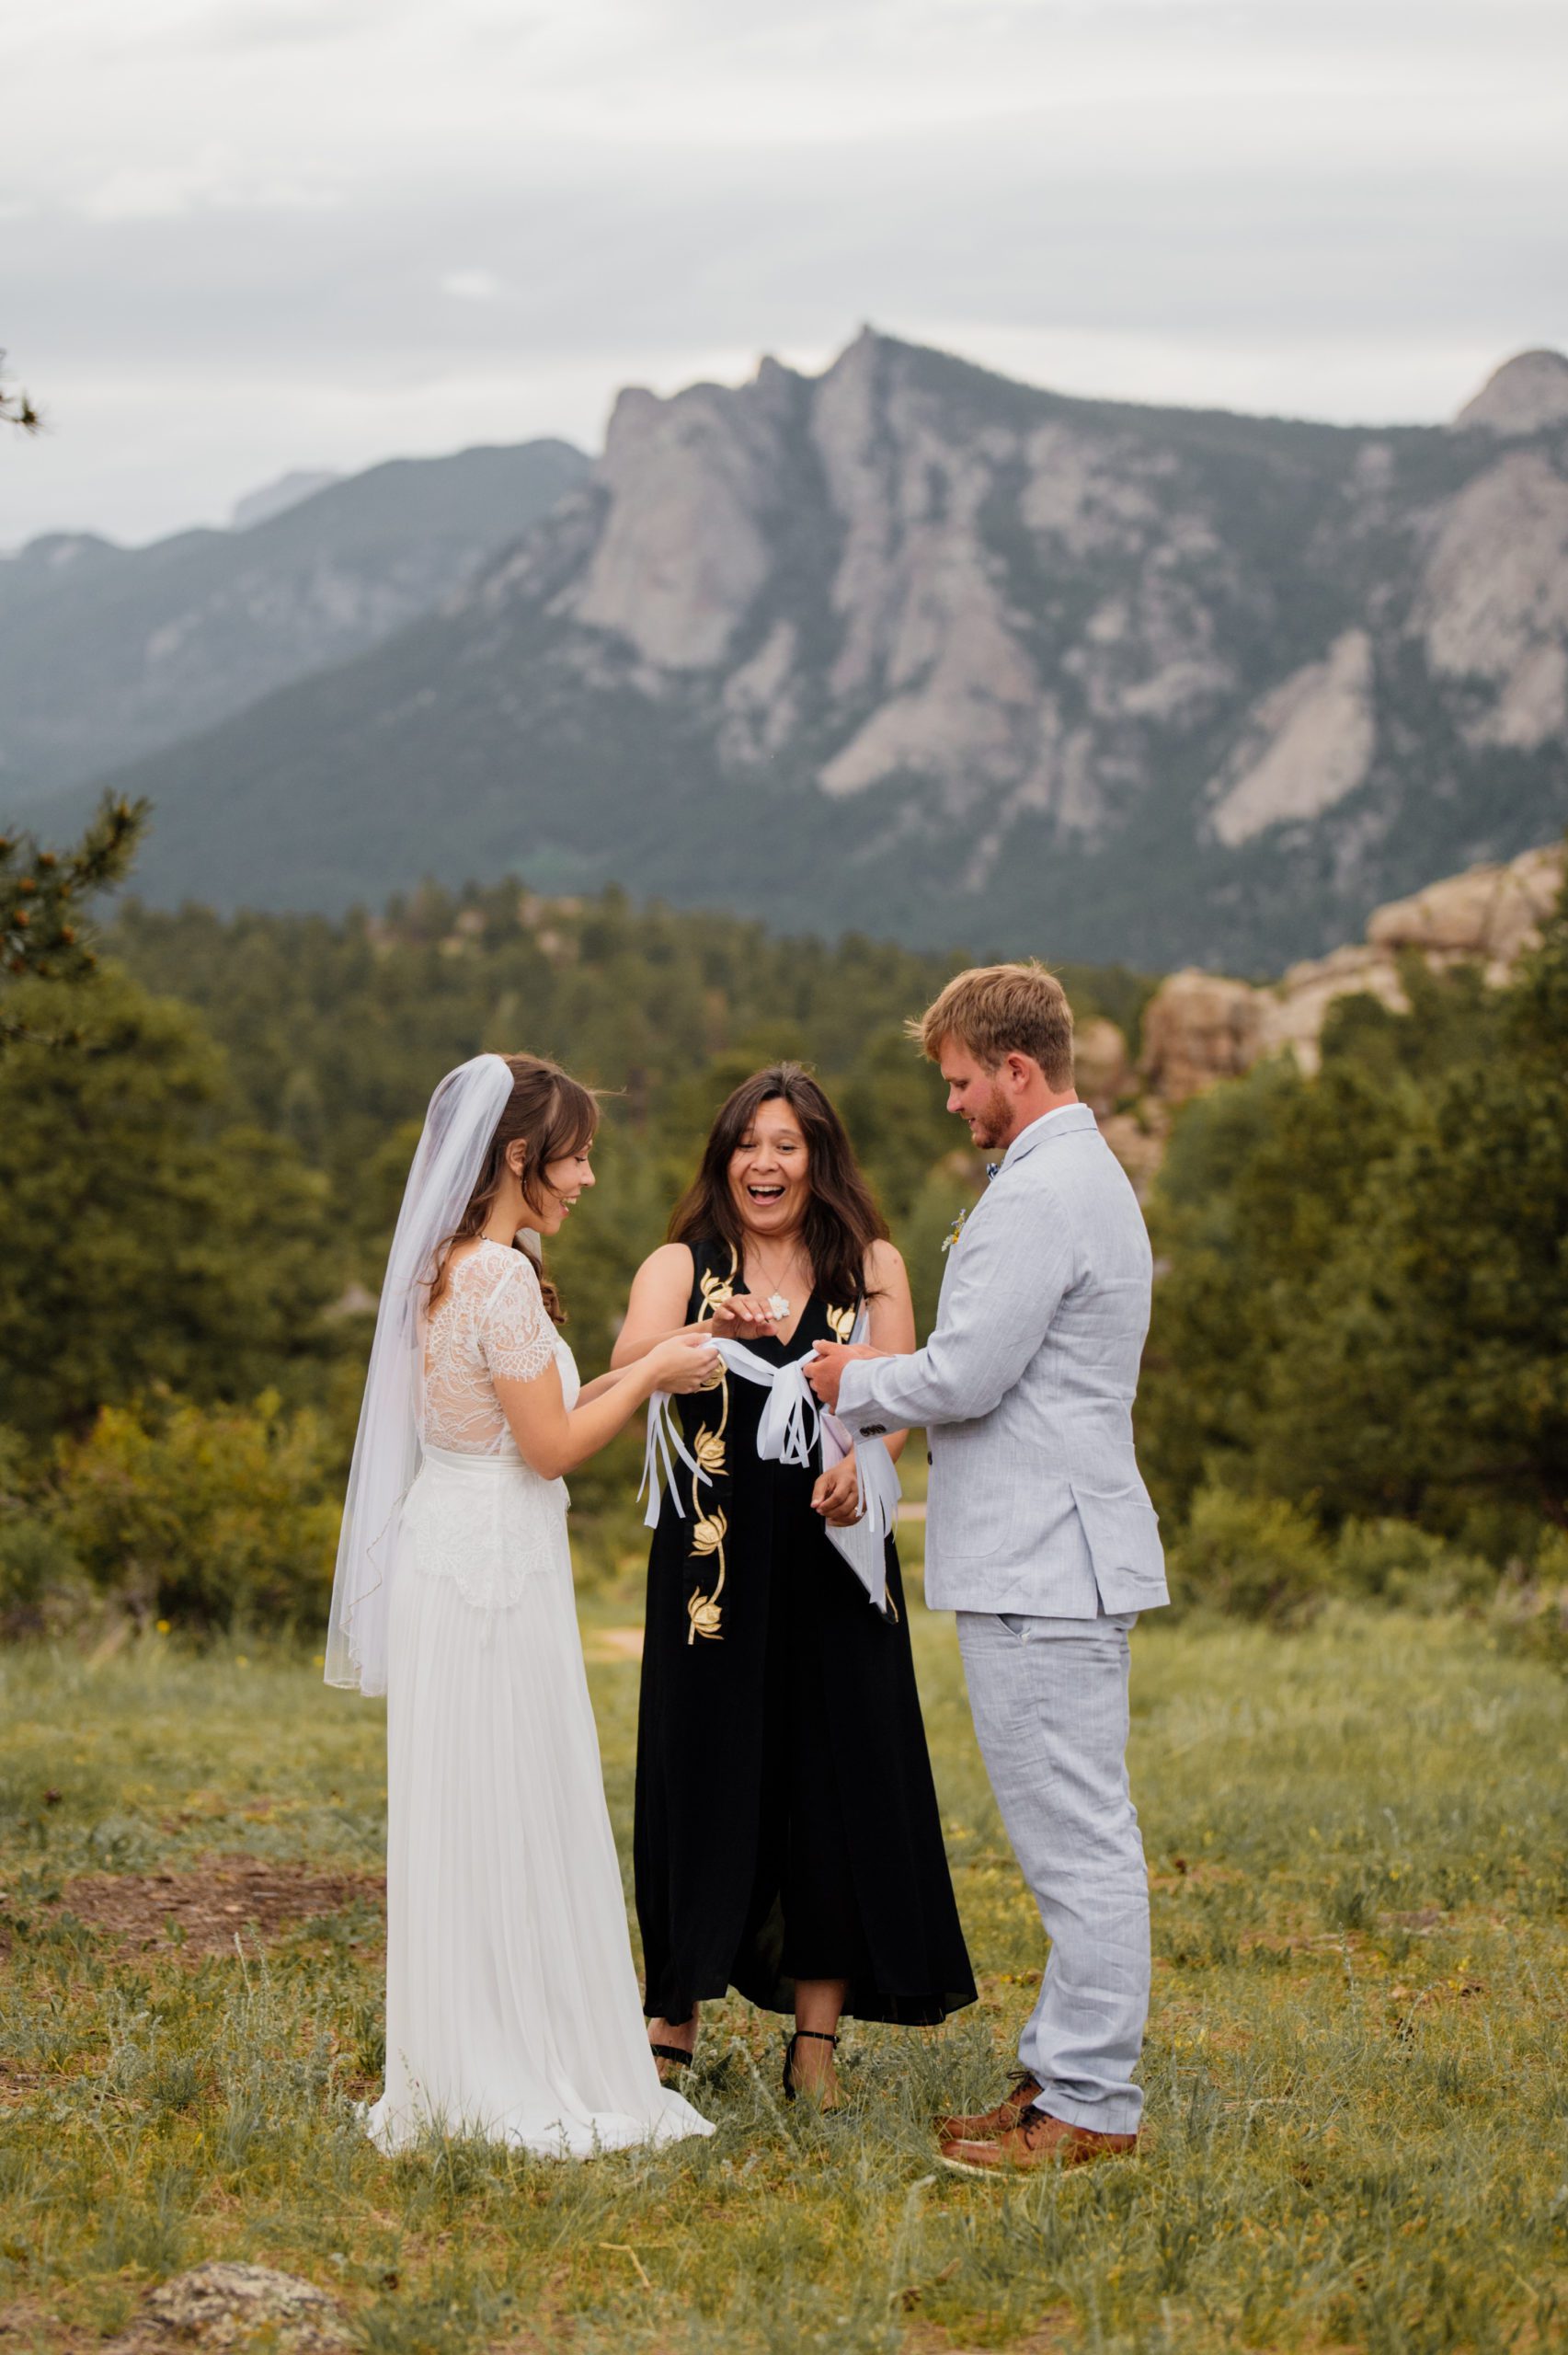 The officiant, bride and groom giggle during their elopement ceremony at Knoll Willows in Estes Park.